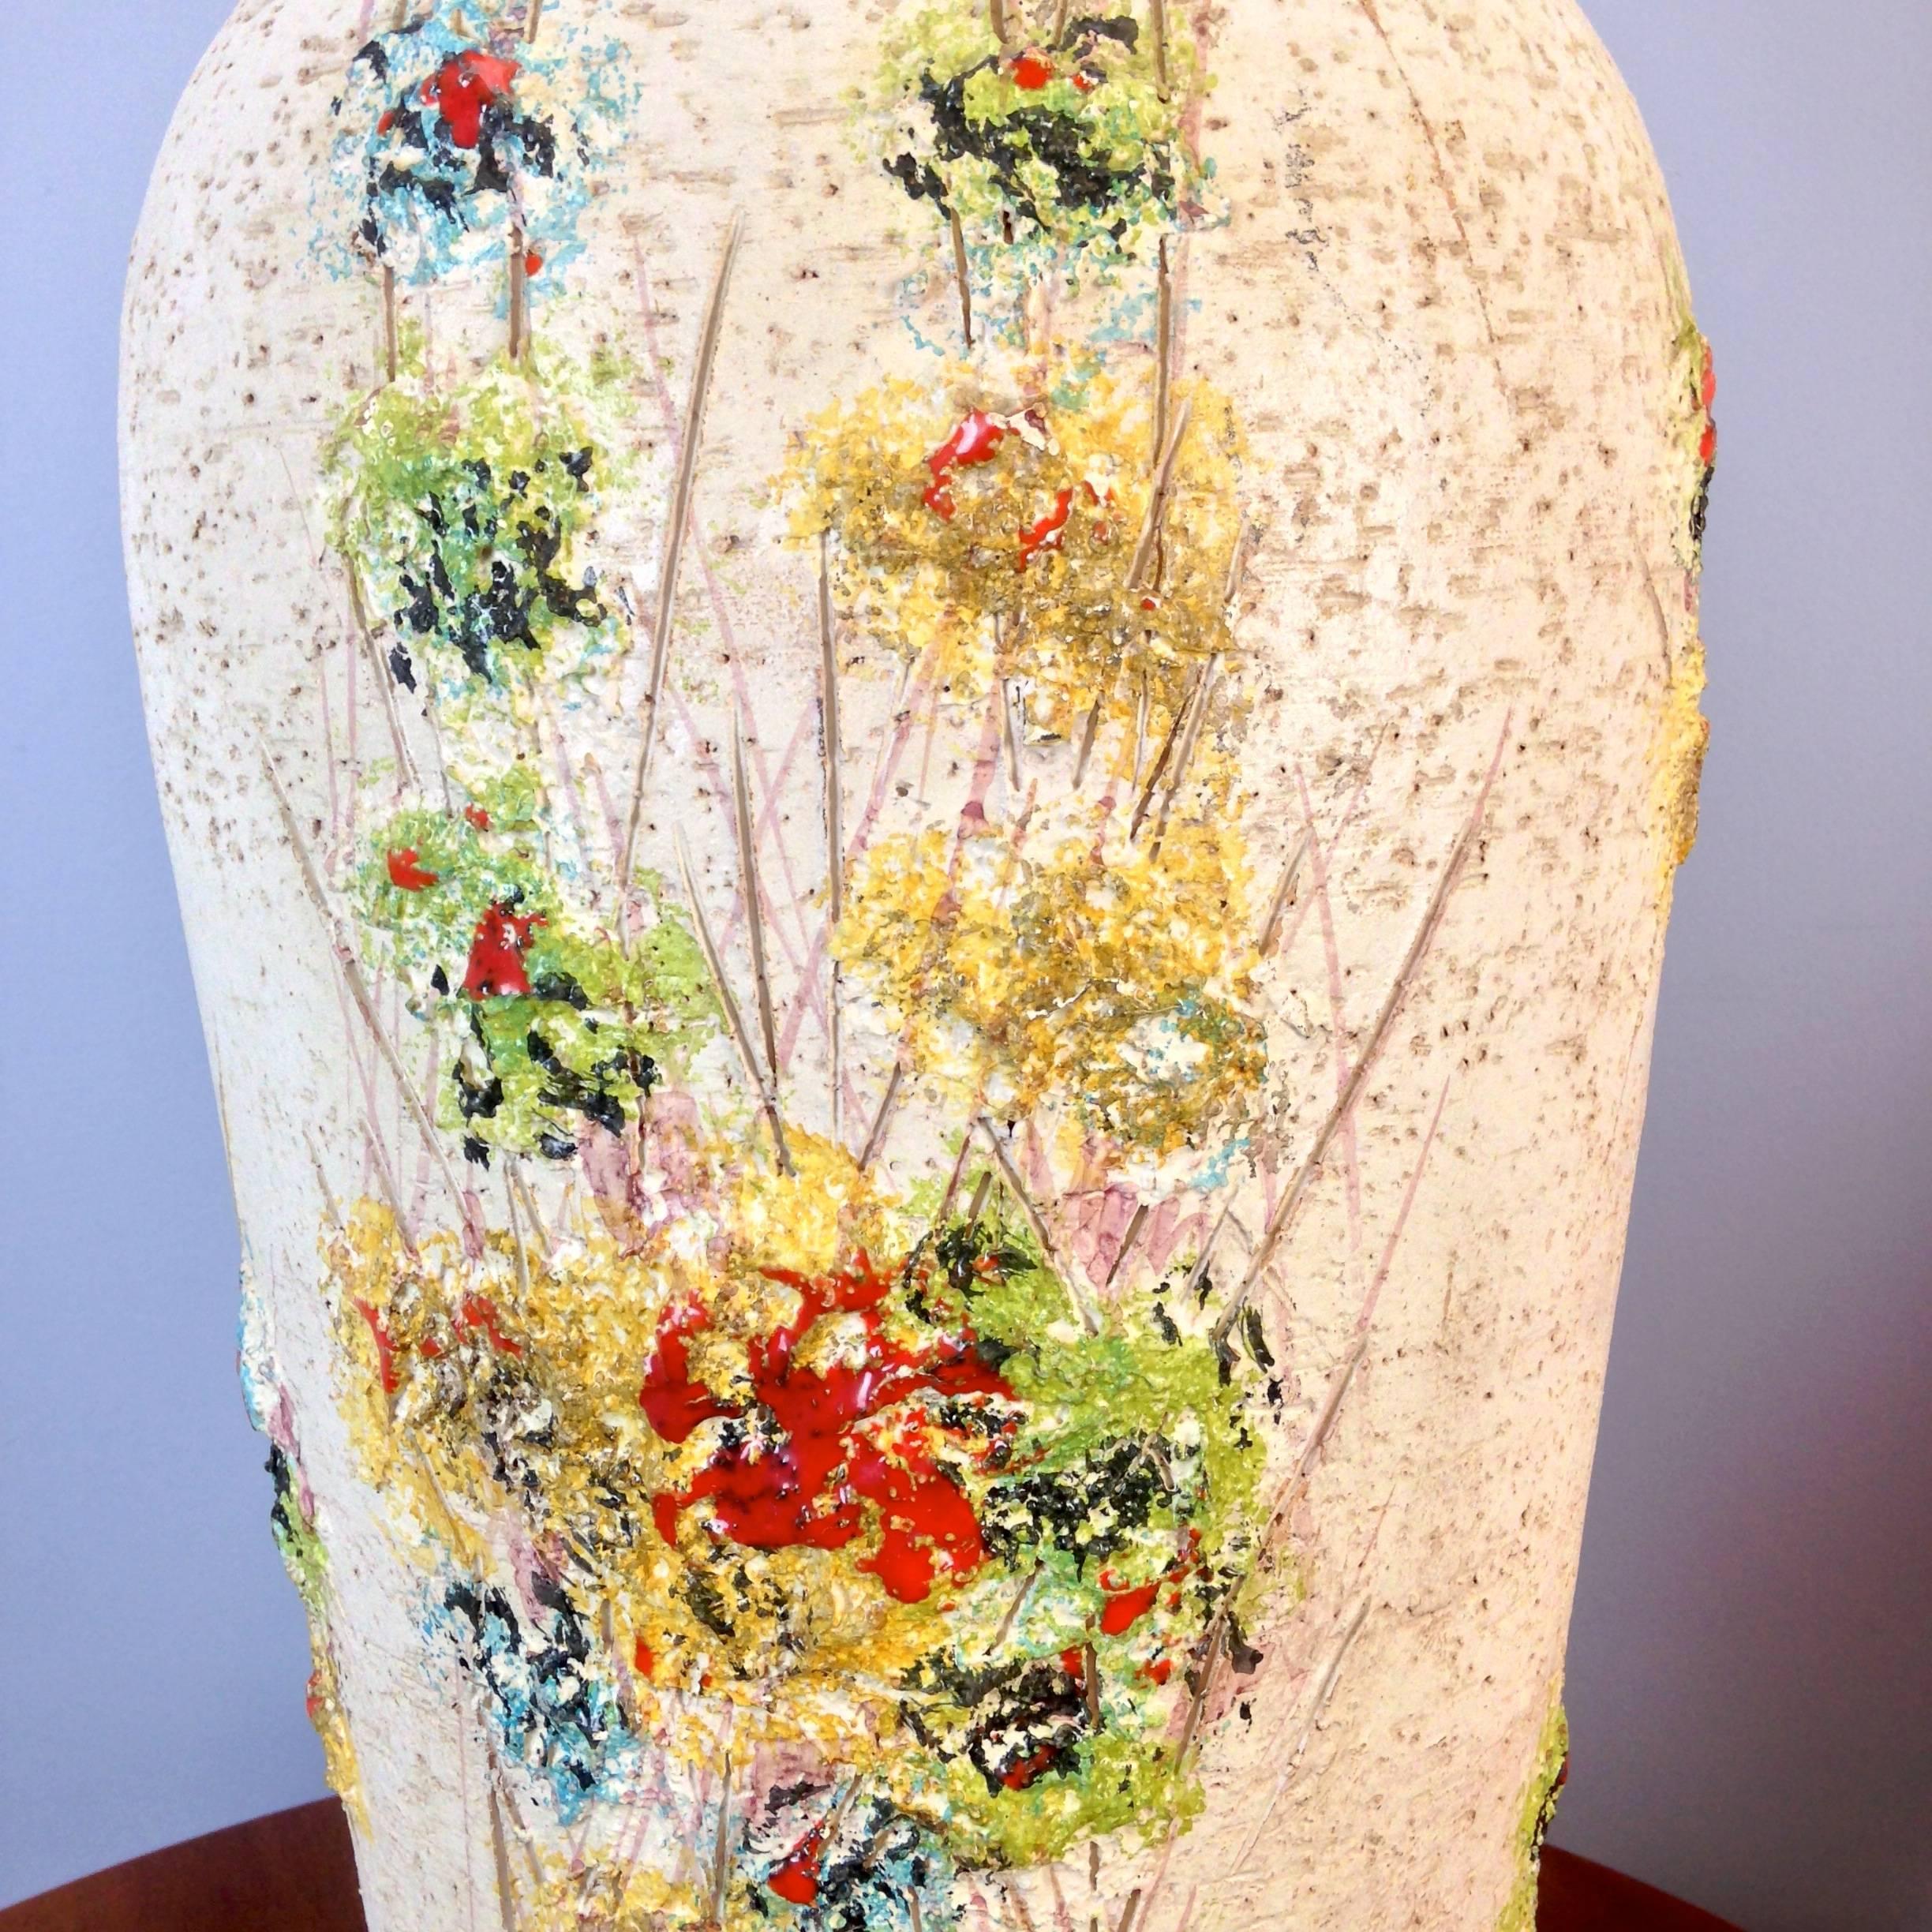 This lamp designed by Aldo Londi for Bitossi Ceramiche, Italy and imported by Raymor.  This specific design was called "Abstract Garden." 
Signed to base.

Ceramic vessel alone is approx 10" wide,
and nearly 24" in